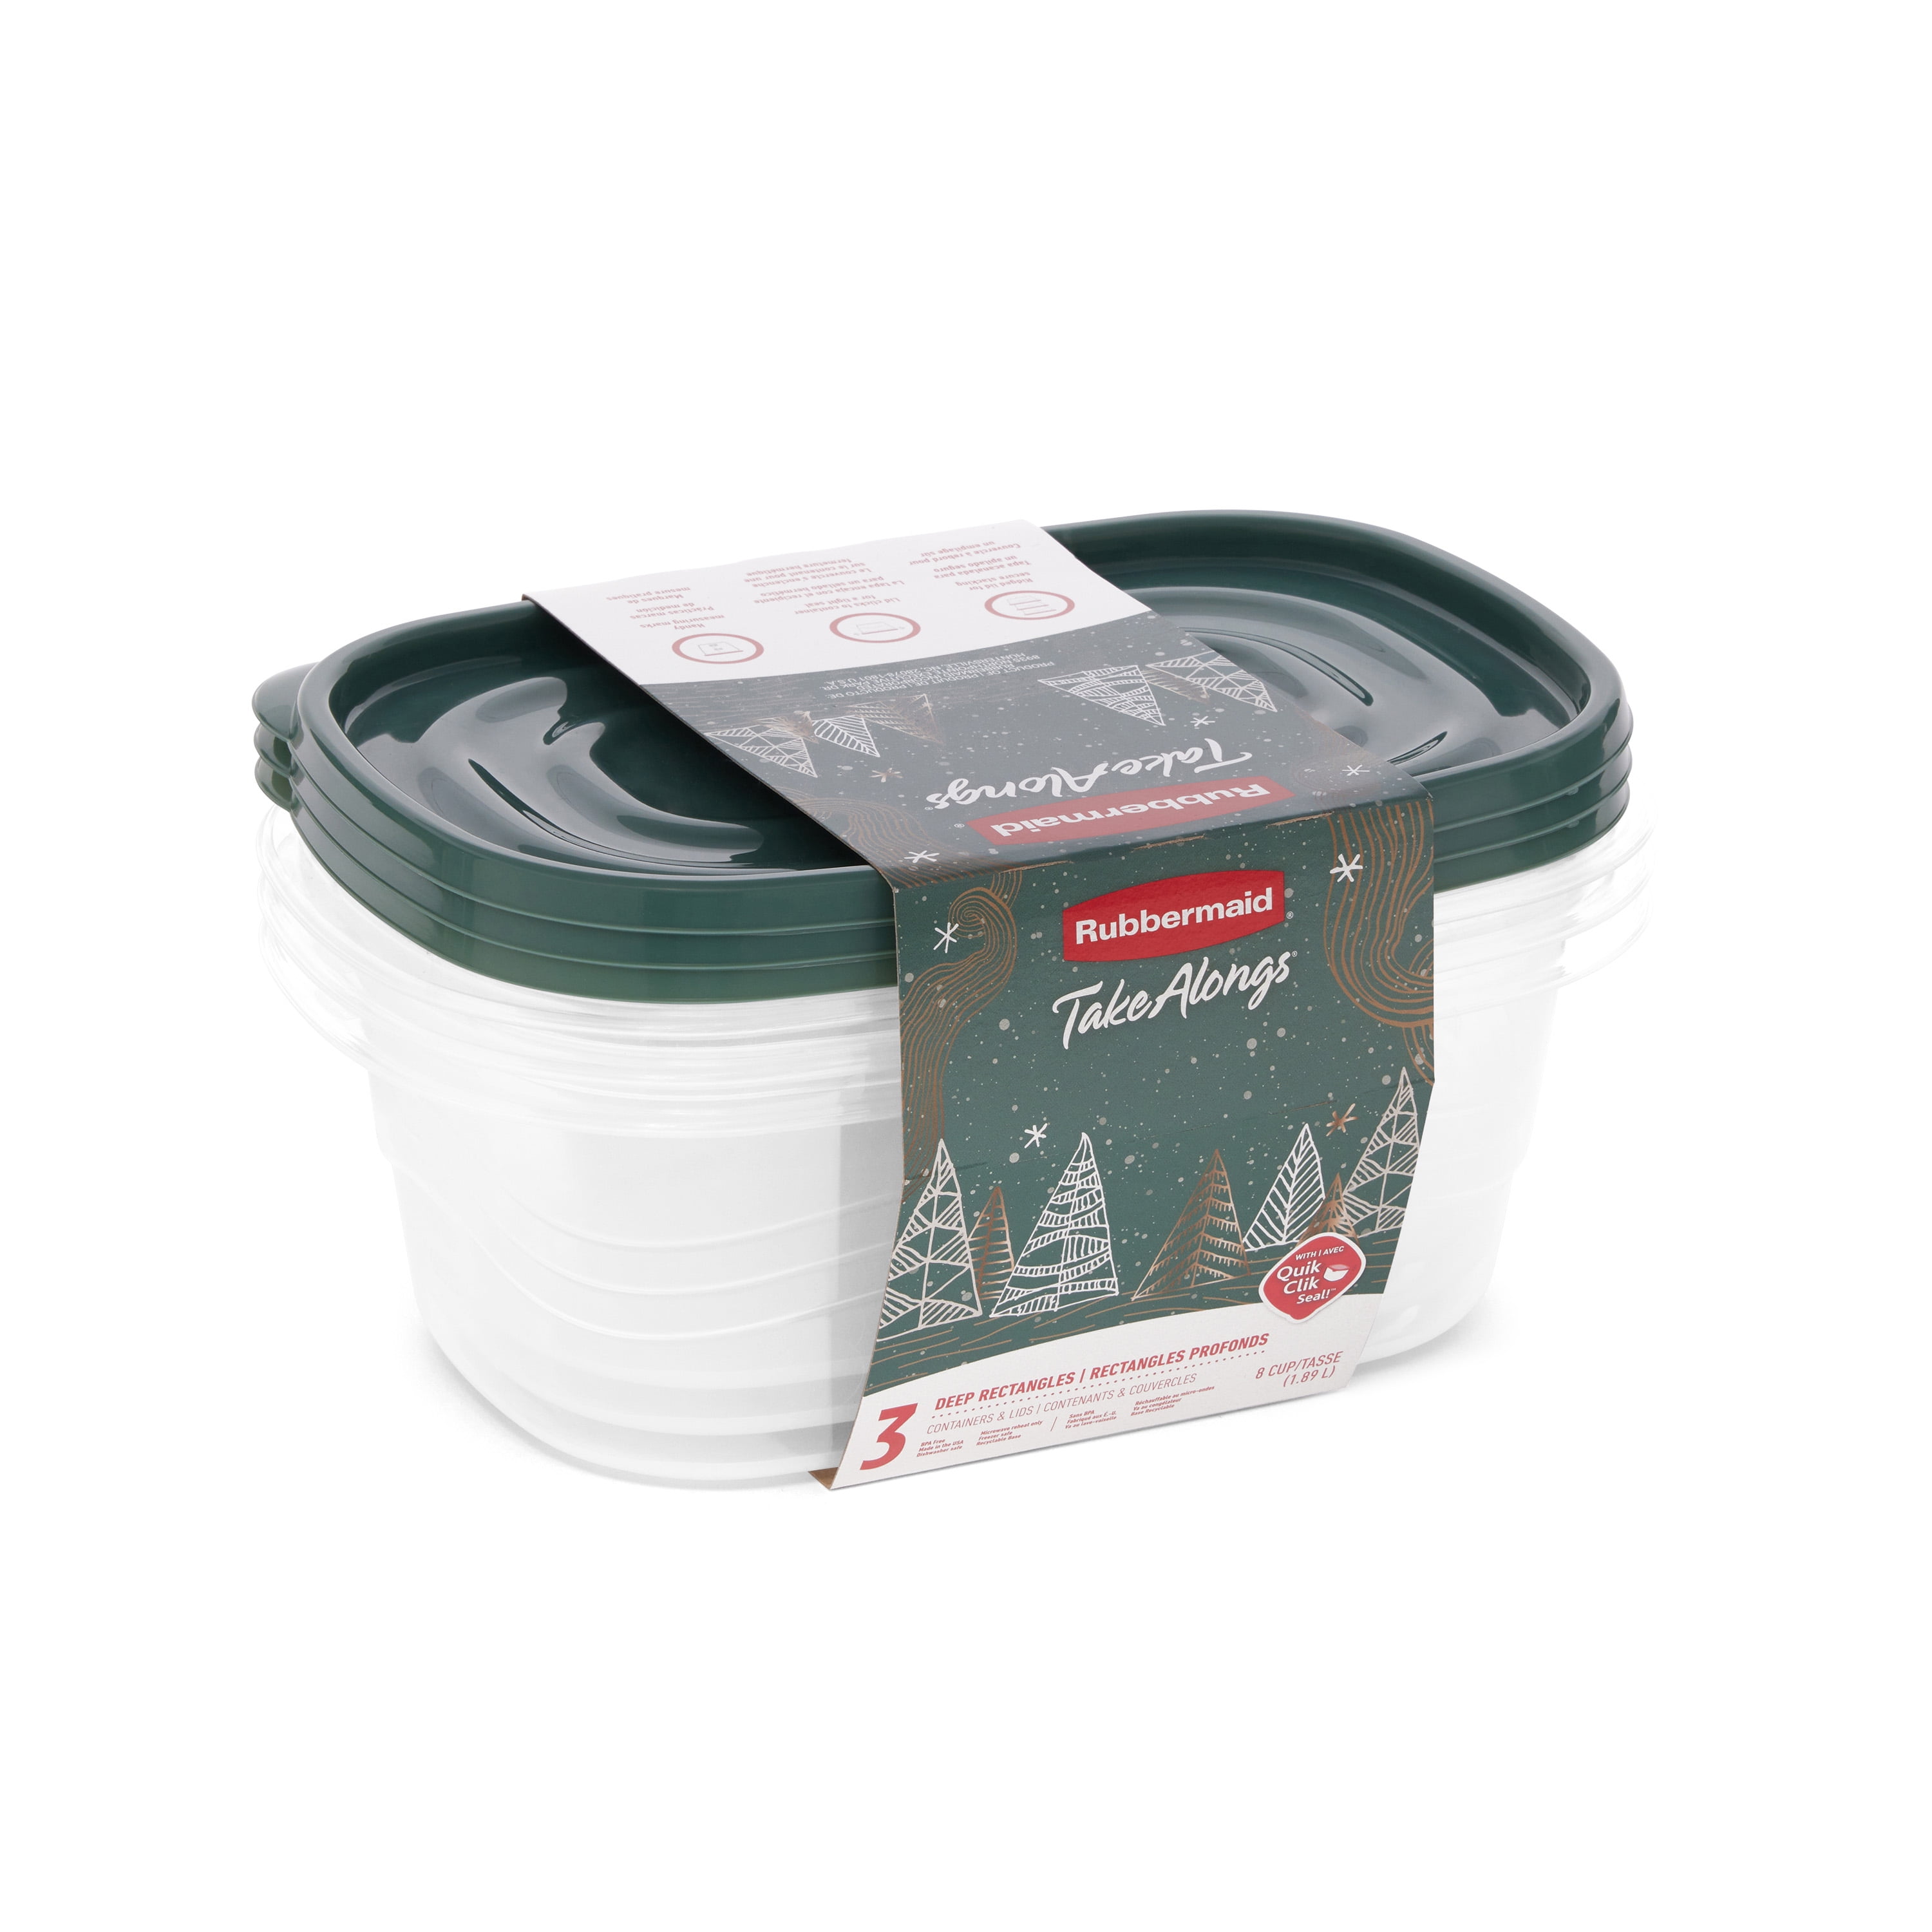 Rubbermaid - Rubbermaid, Take Alongs - Container & Lids, Deep Rectangles, 8  Cup (2 count), Shop